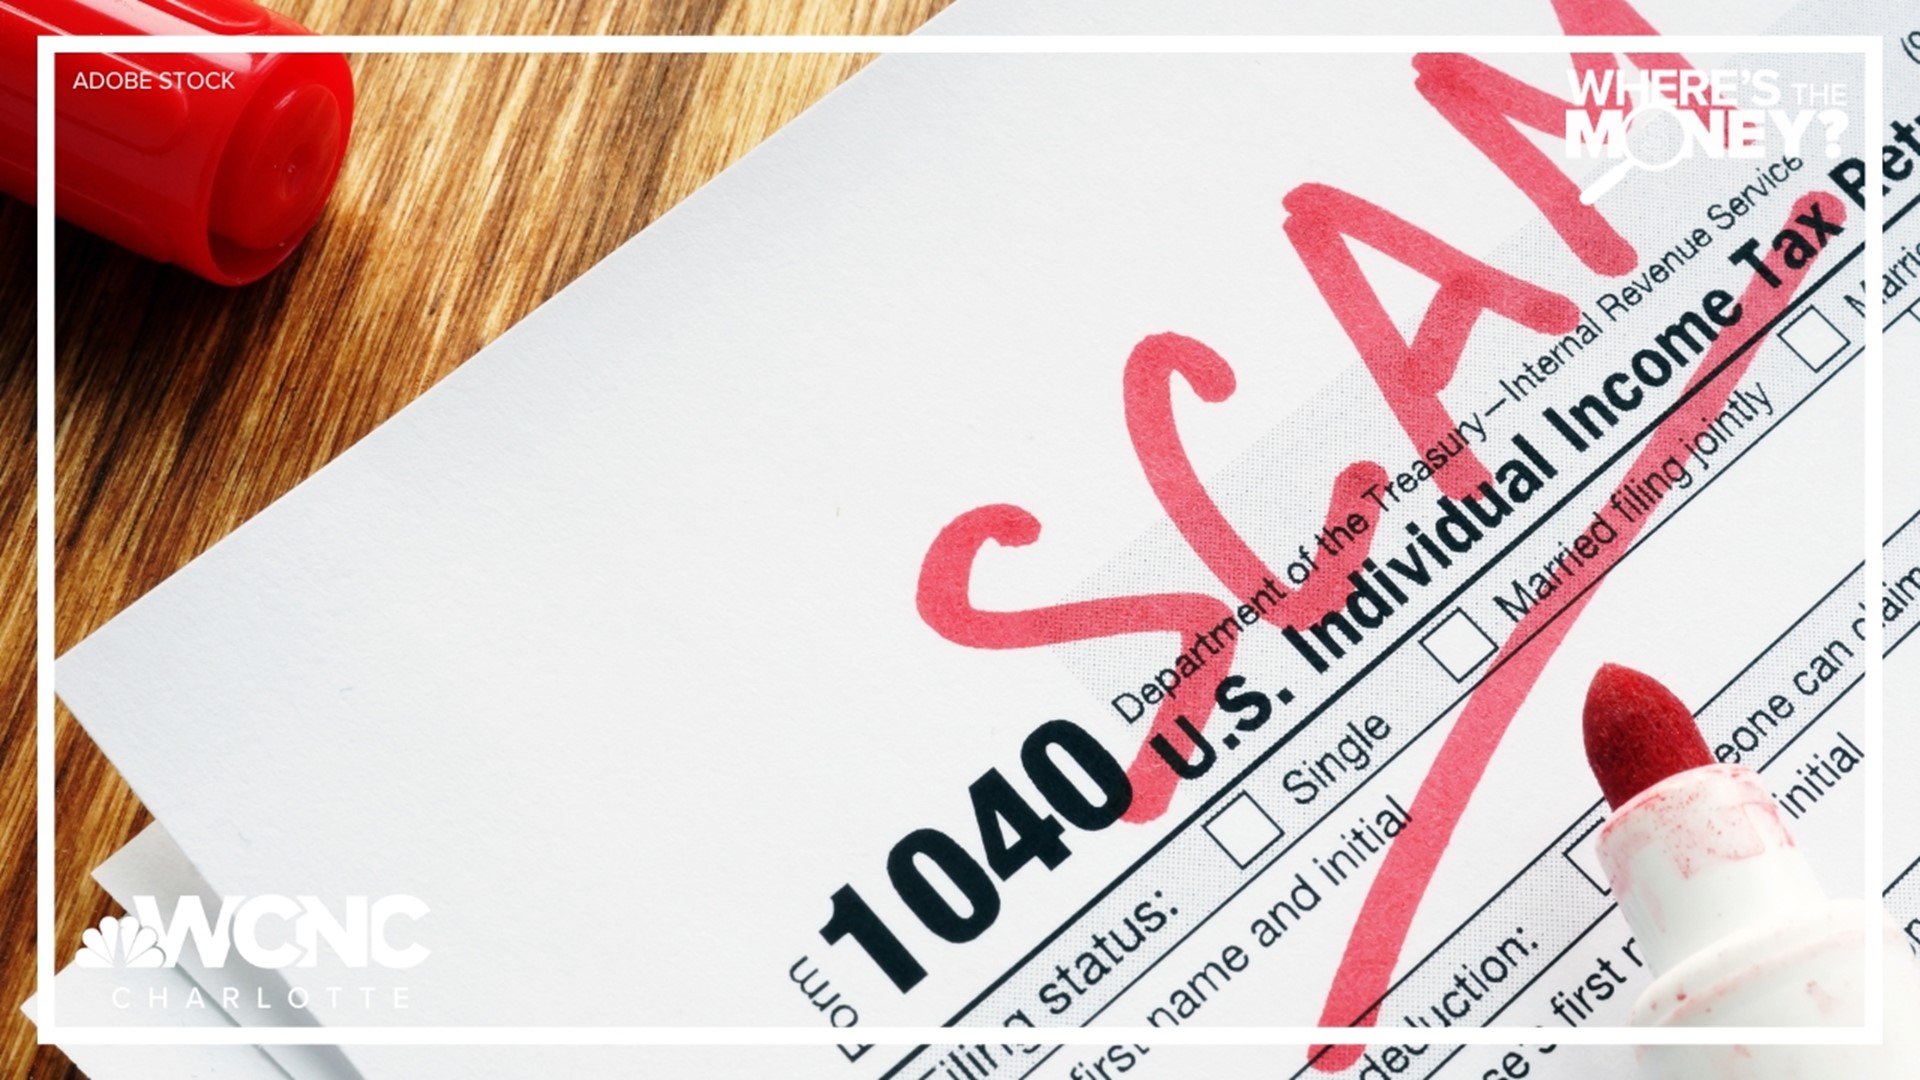 It's Tax Day, and WCNC Charlotte is helping you get ahead and avoid scams.